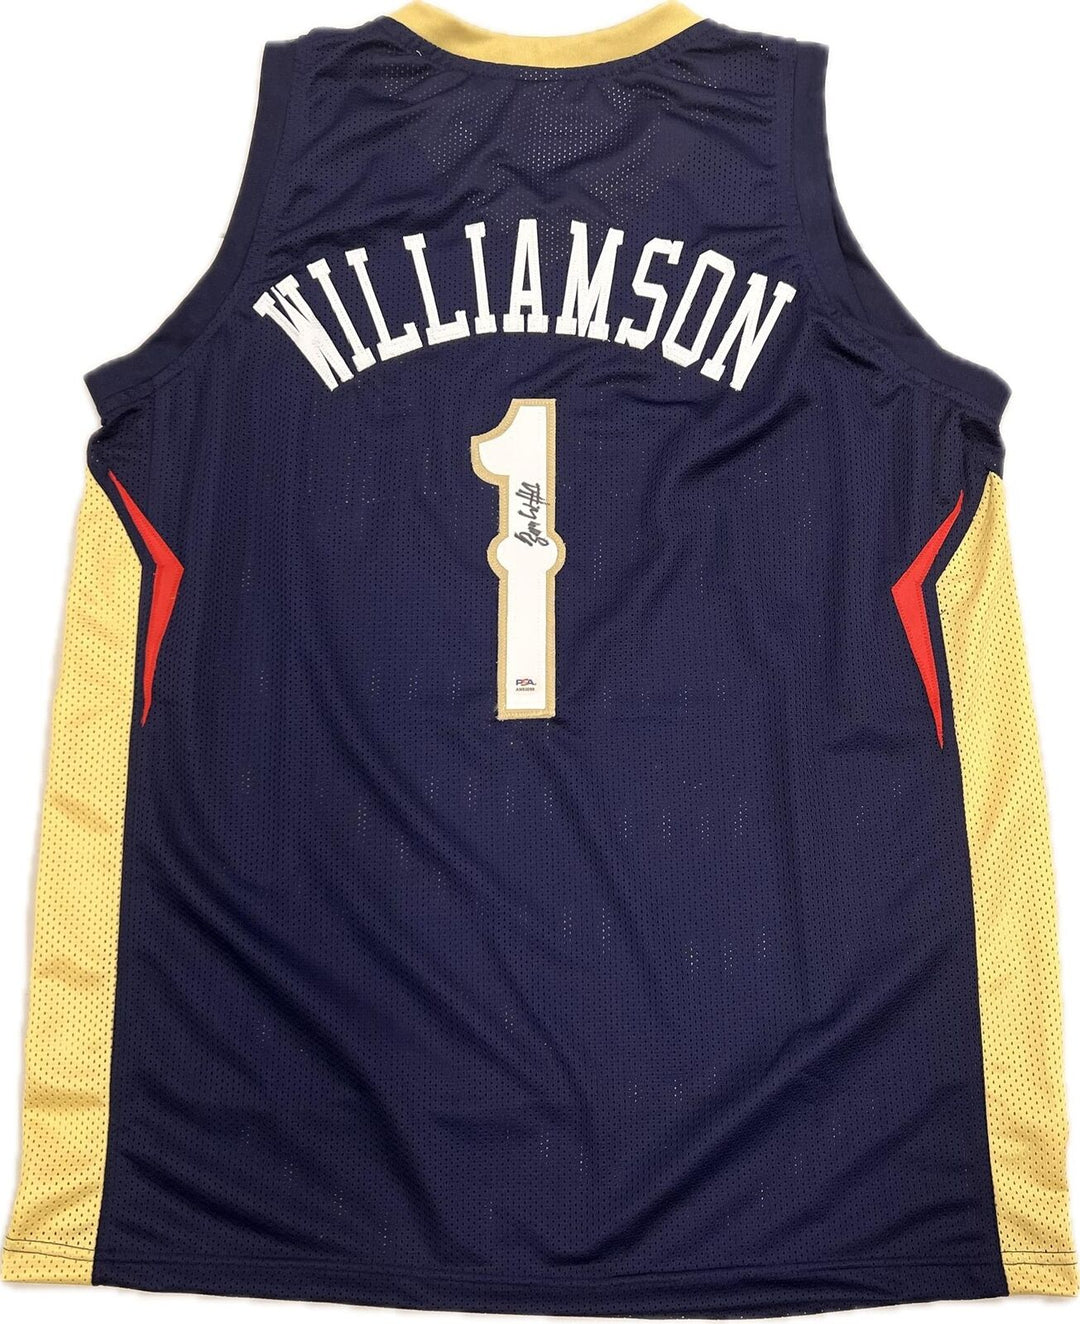 Zion Williamson Signed Jersey PSA/DNA New Orleans Pelicans Autographed Image 1